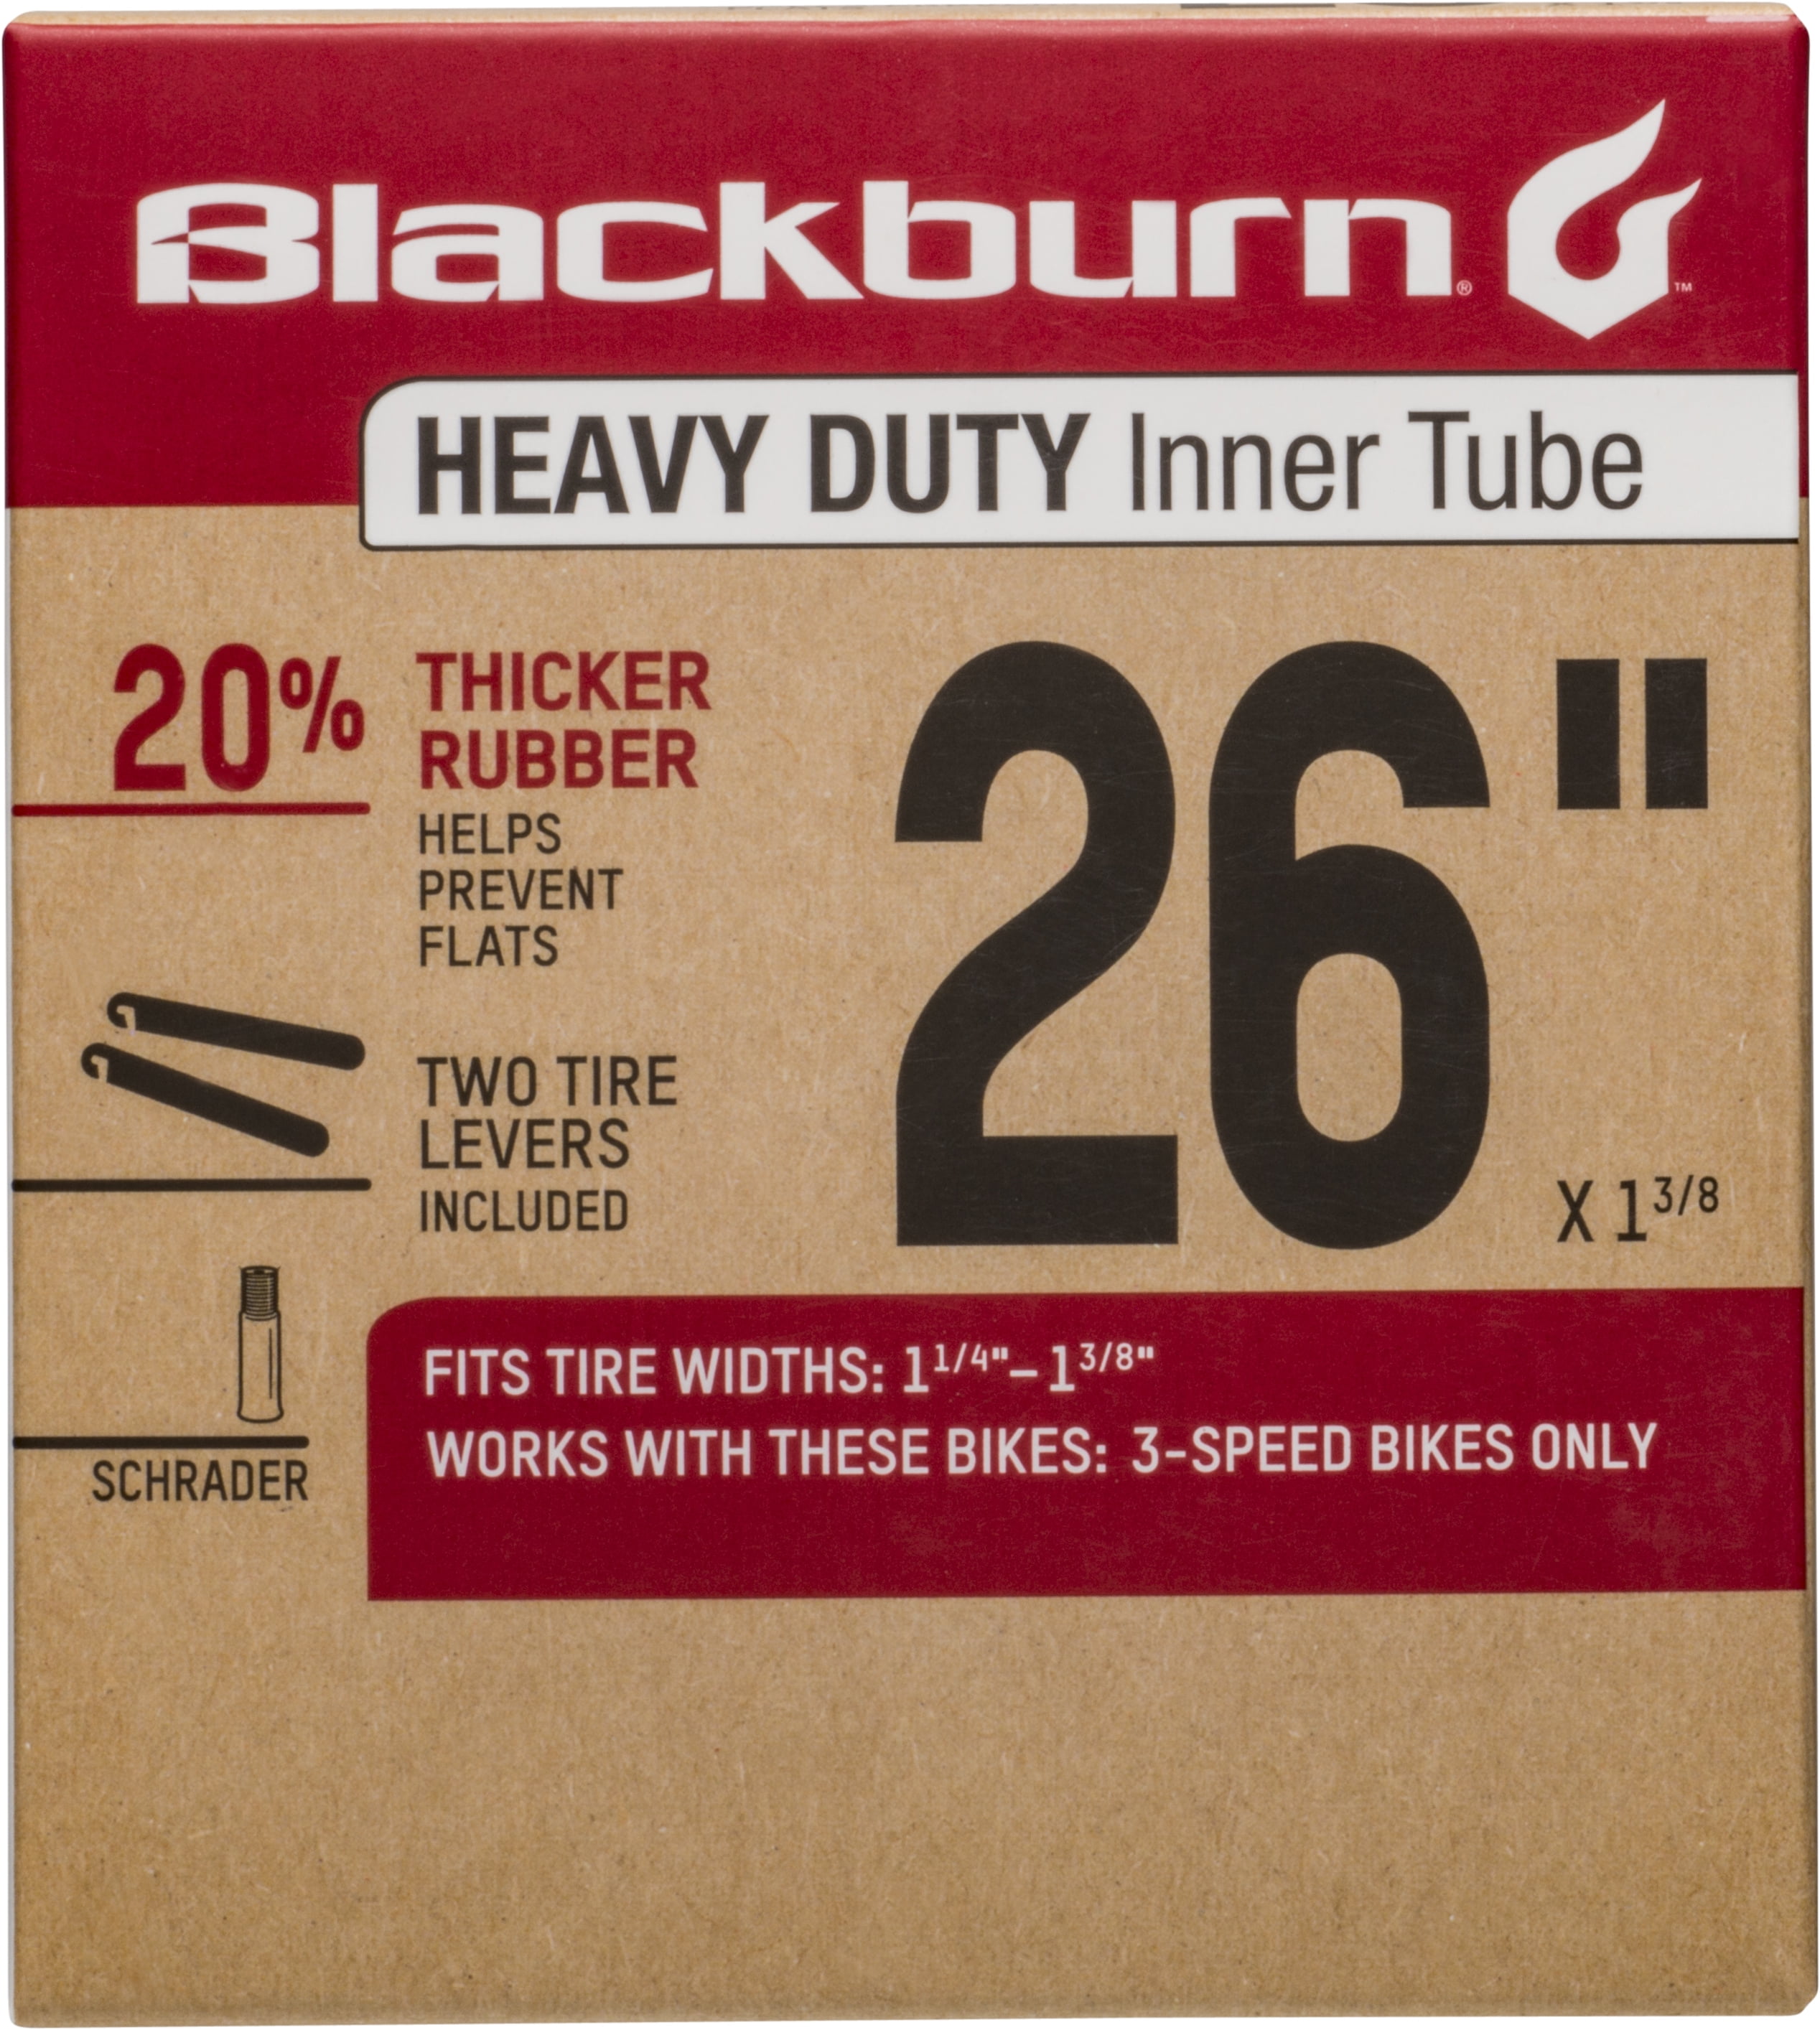 2 PACK *1st Class Post* CYCLE INNER TUBES 24" x 1 3/8 SCHRADER VALVE BIKE 